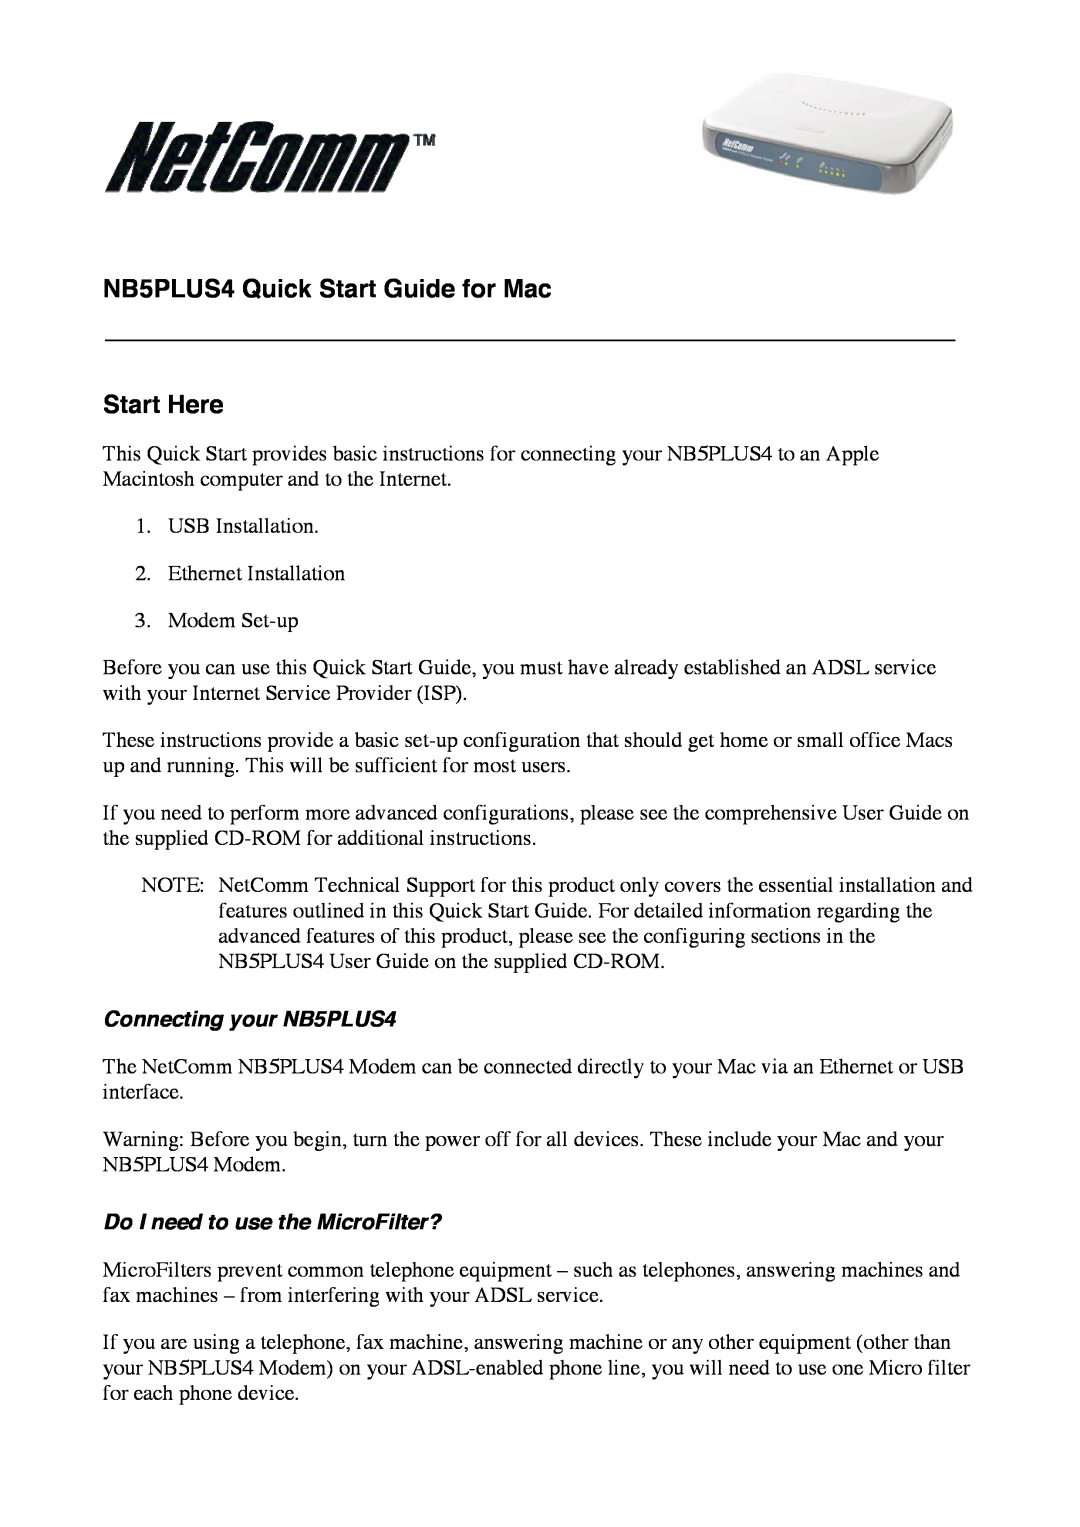 NetComm NB5Plus4 quick start NB5PLUS4 Quick Start Guide for Mac Start Here, Connecting your NB5PLUS4 